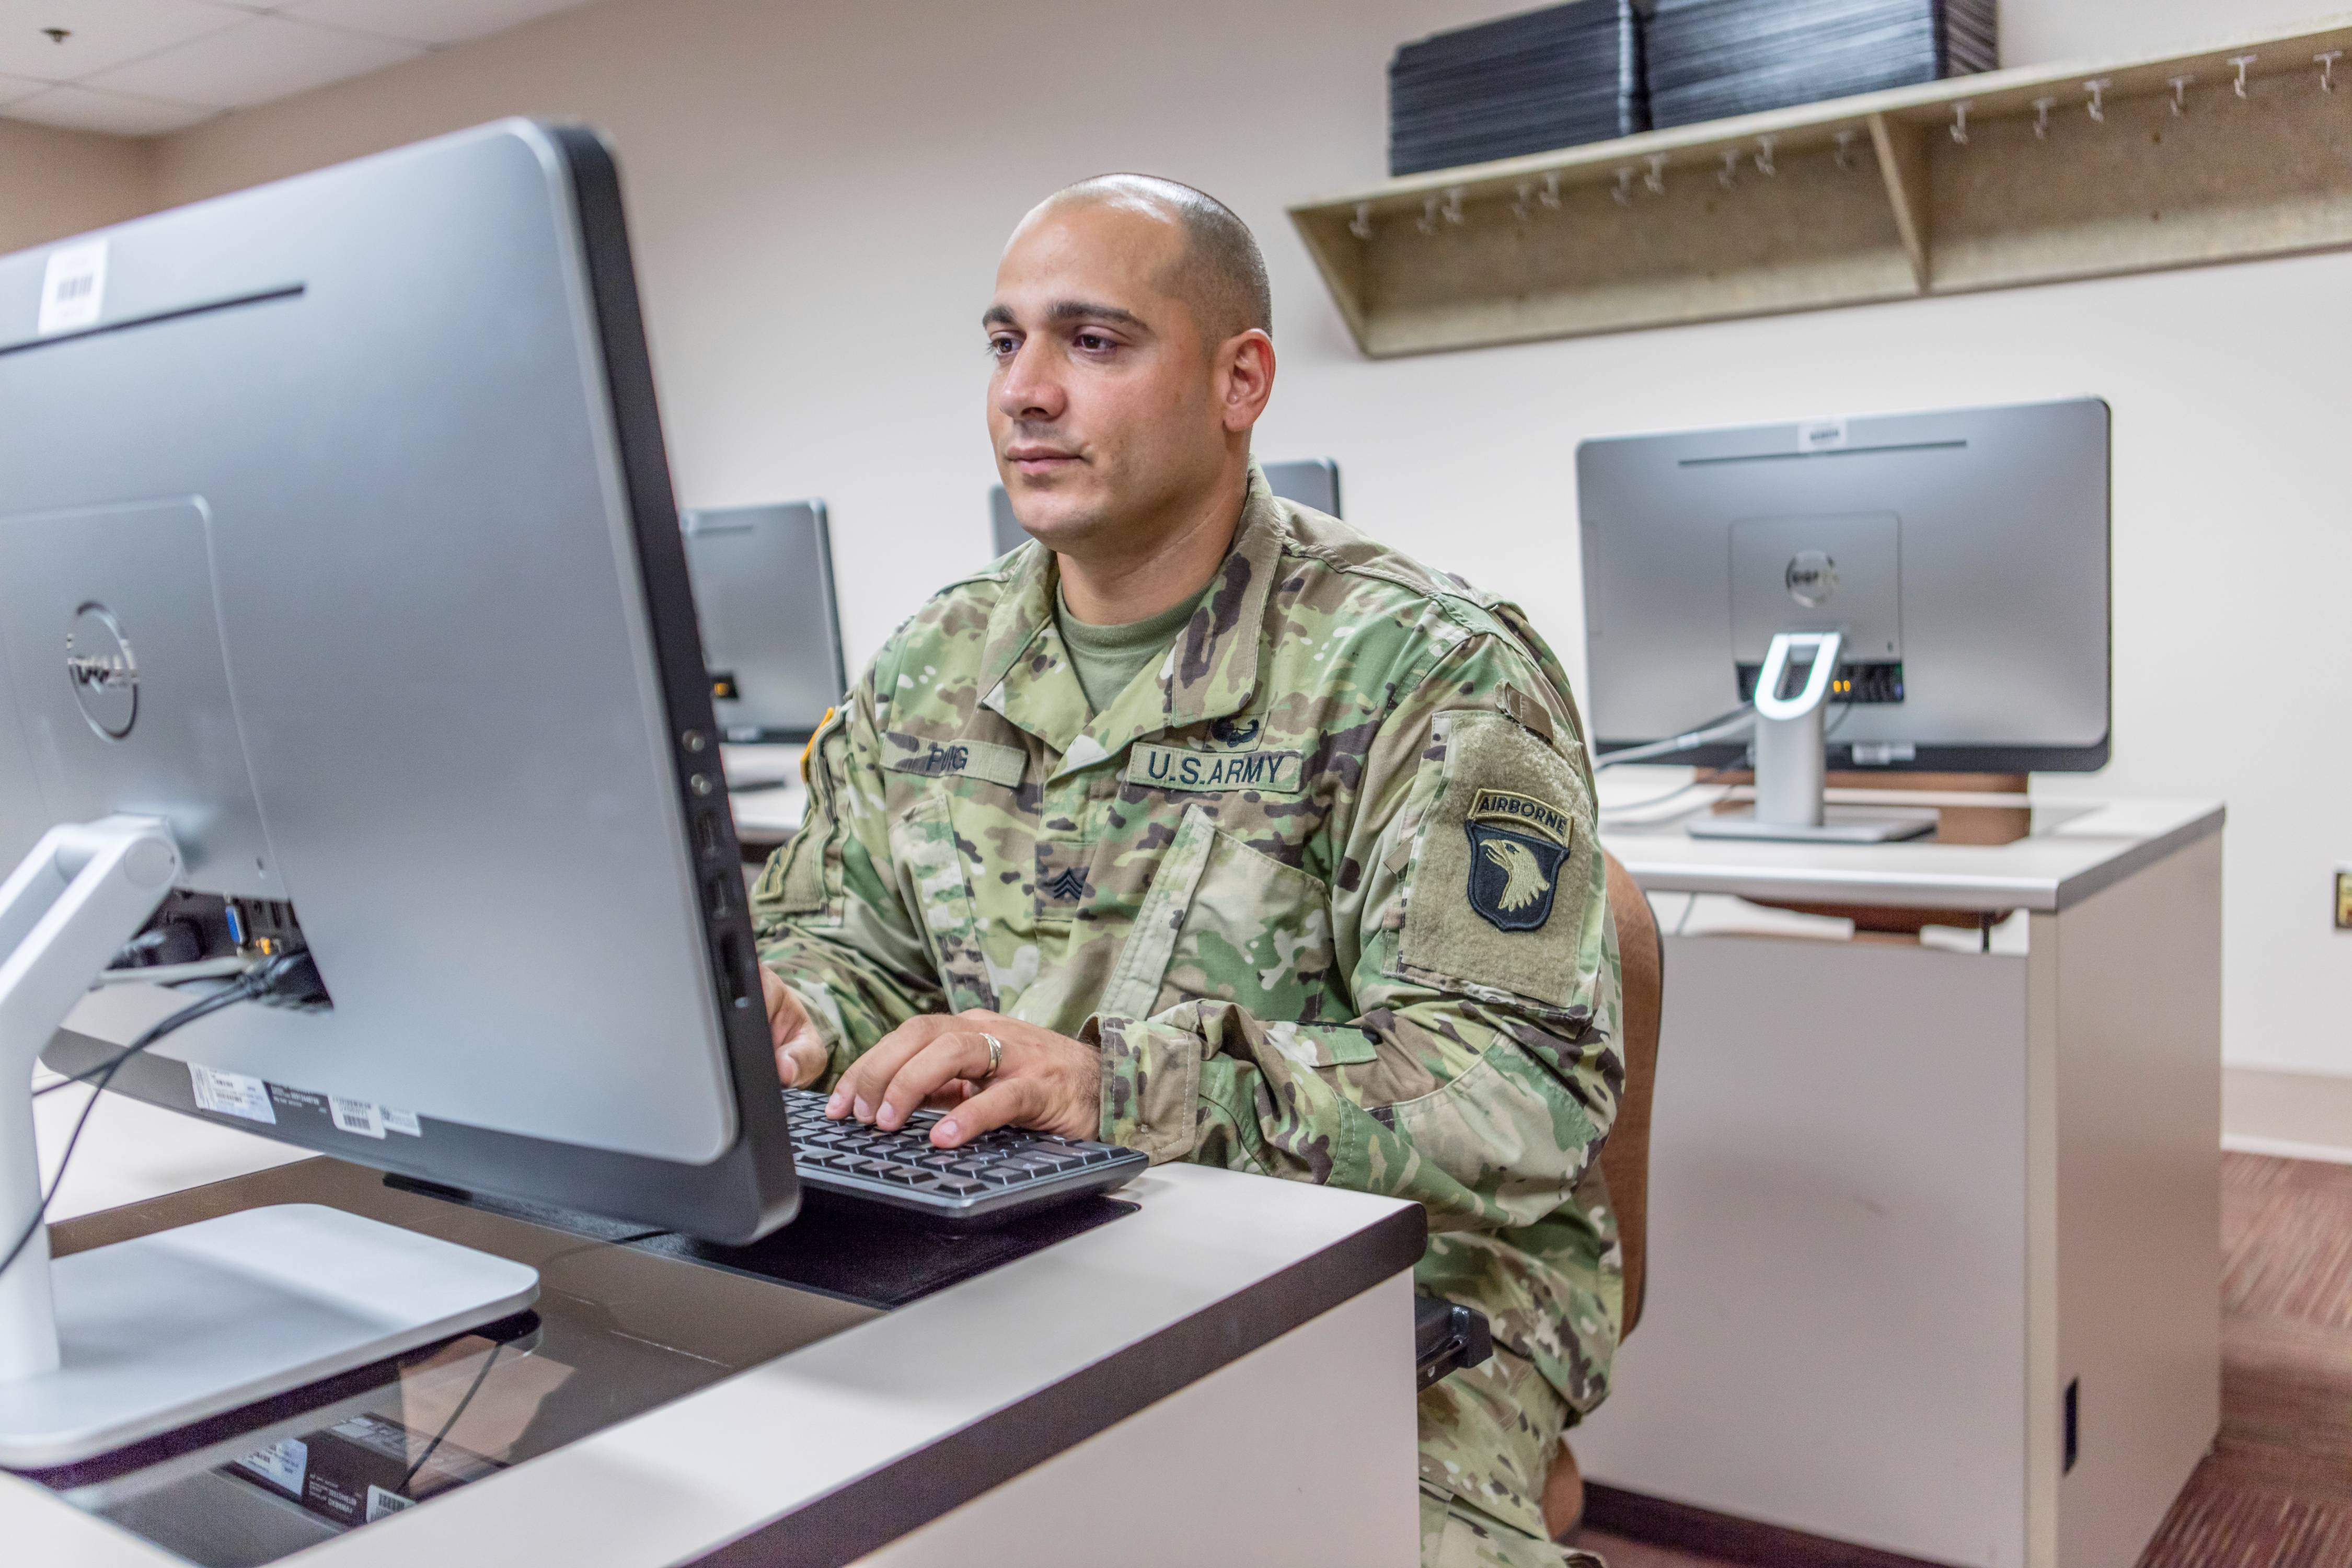 Man in fatigues sitting at computer